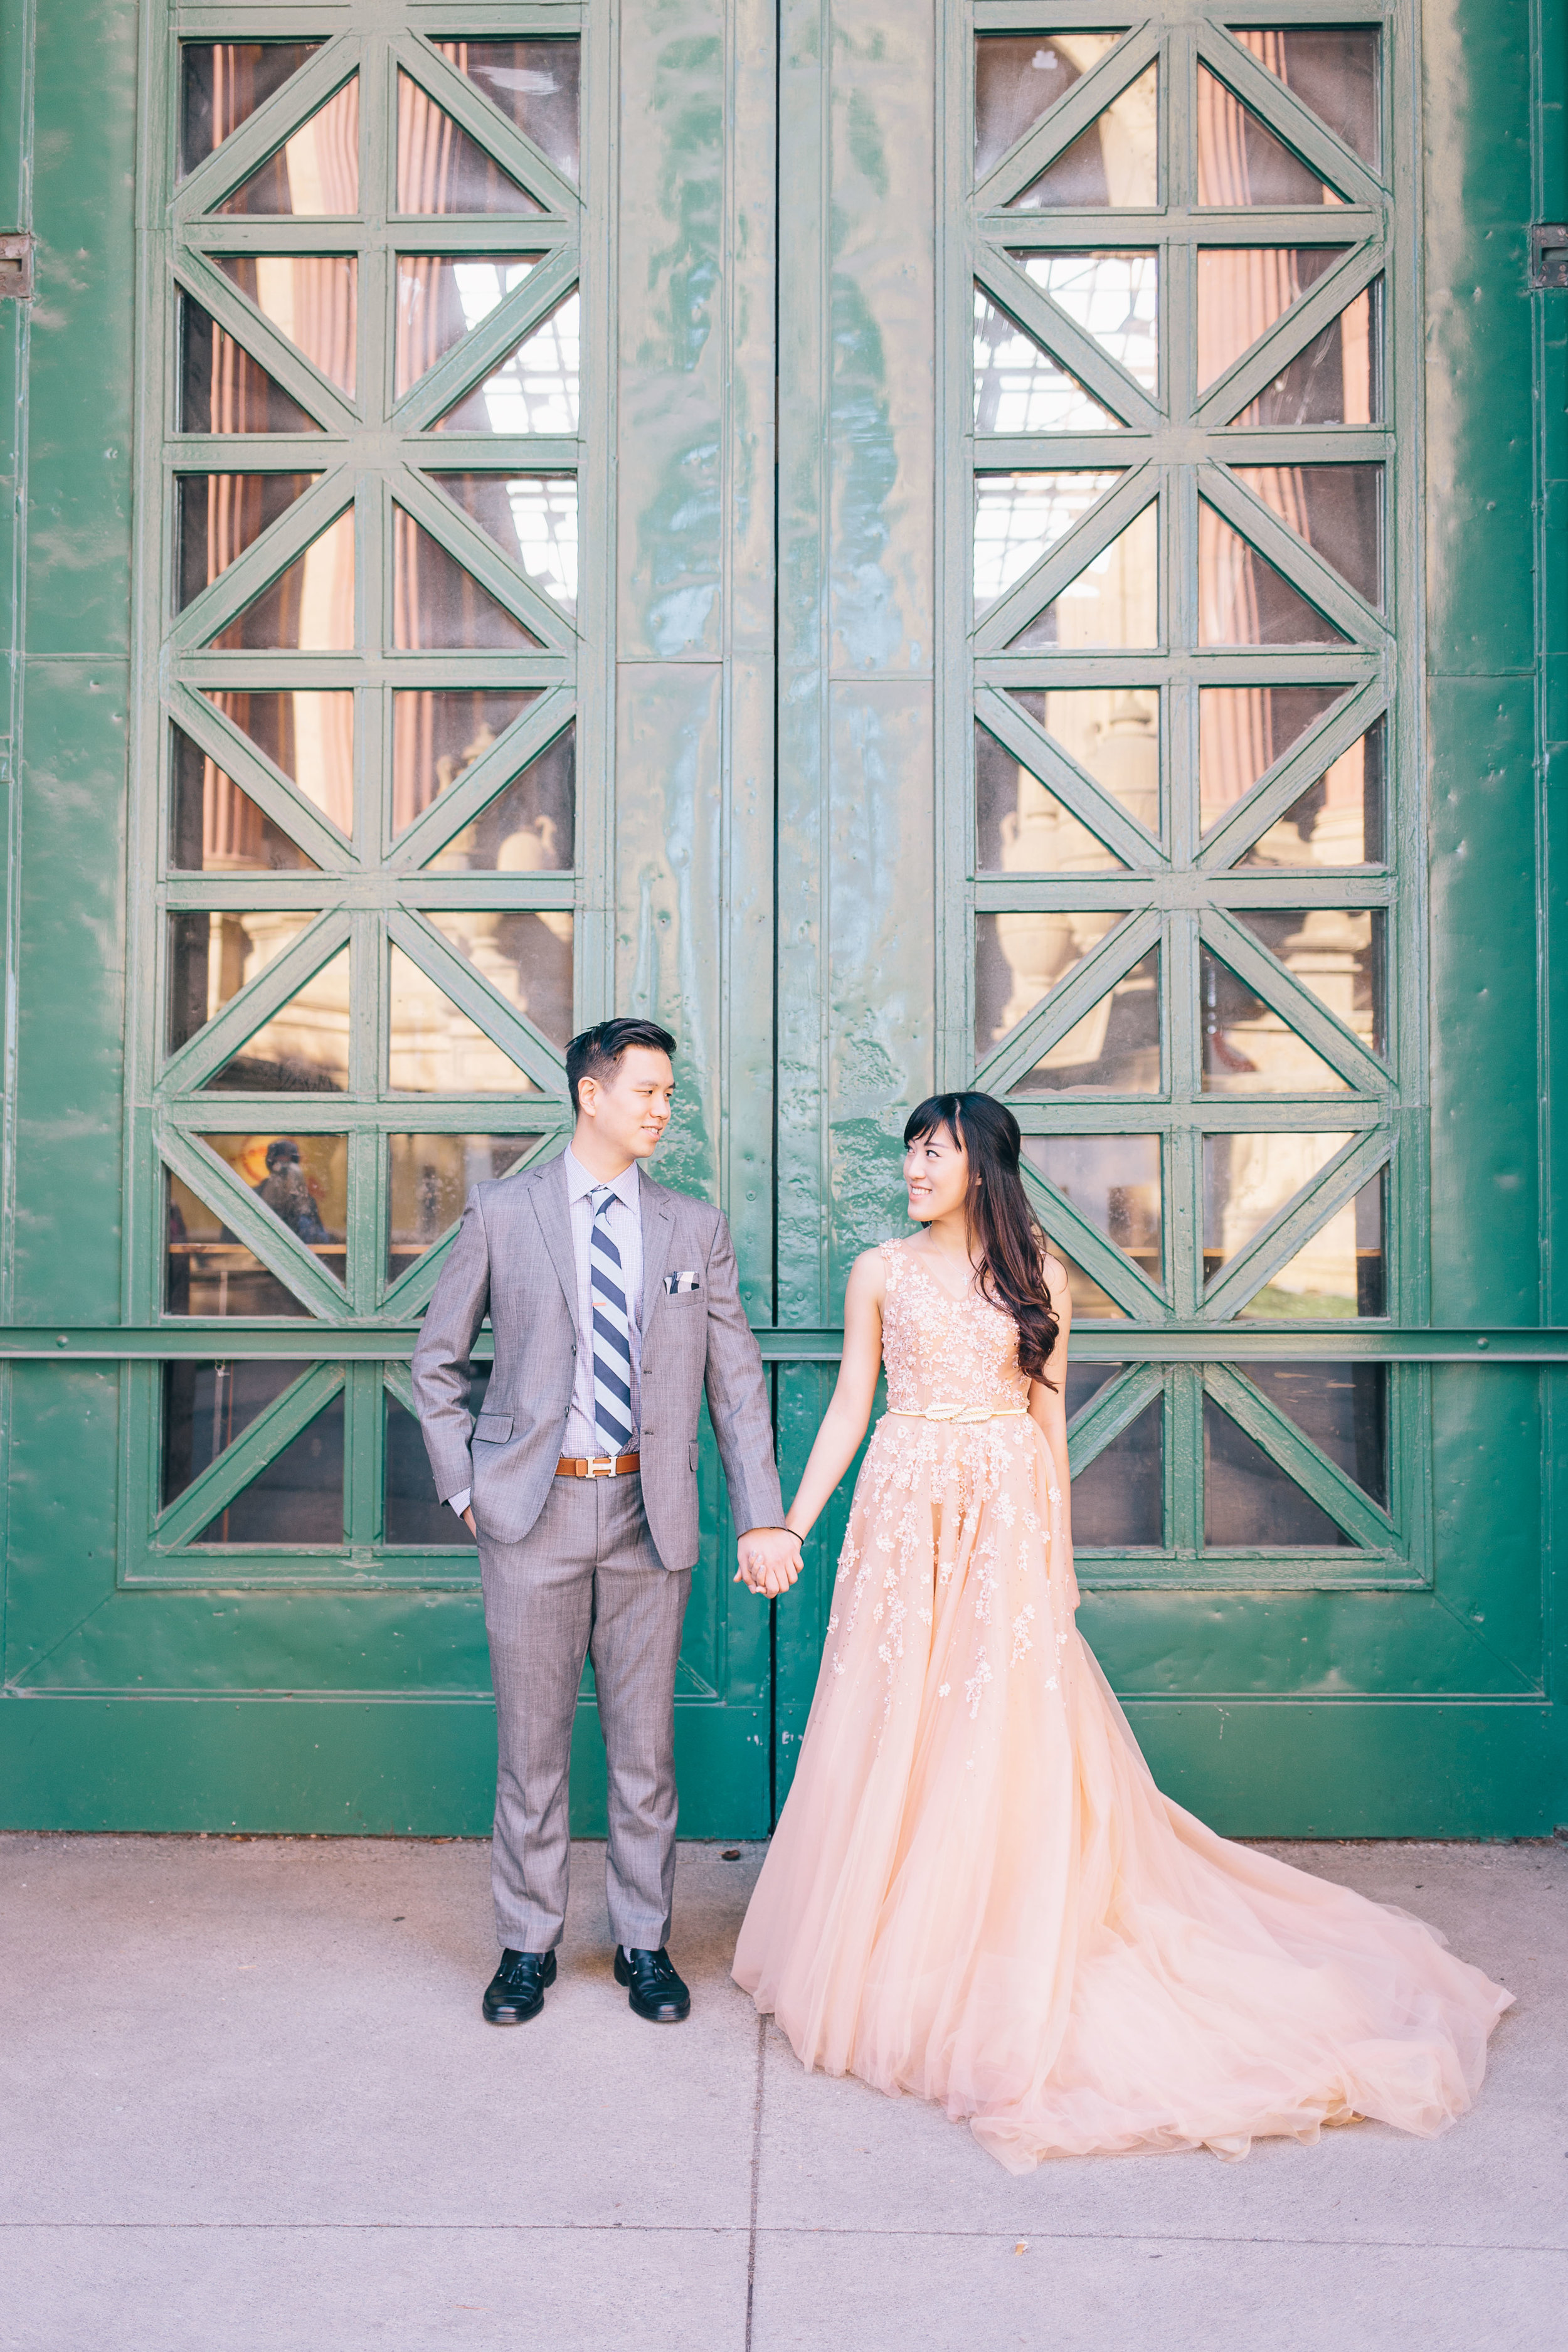 Best Engagement Photo Locations in San Francisco - Palace of Fine Arts Engagement Photos by JBJ Pictures (9).jpg